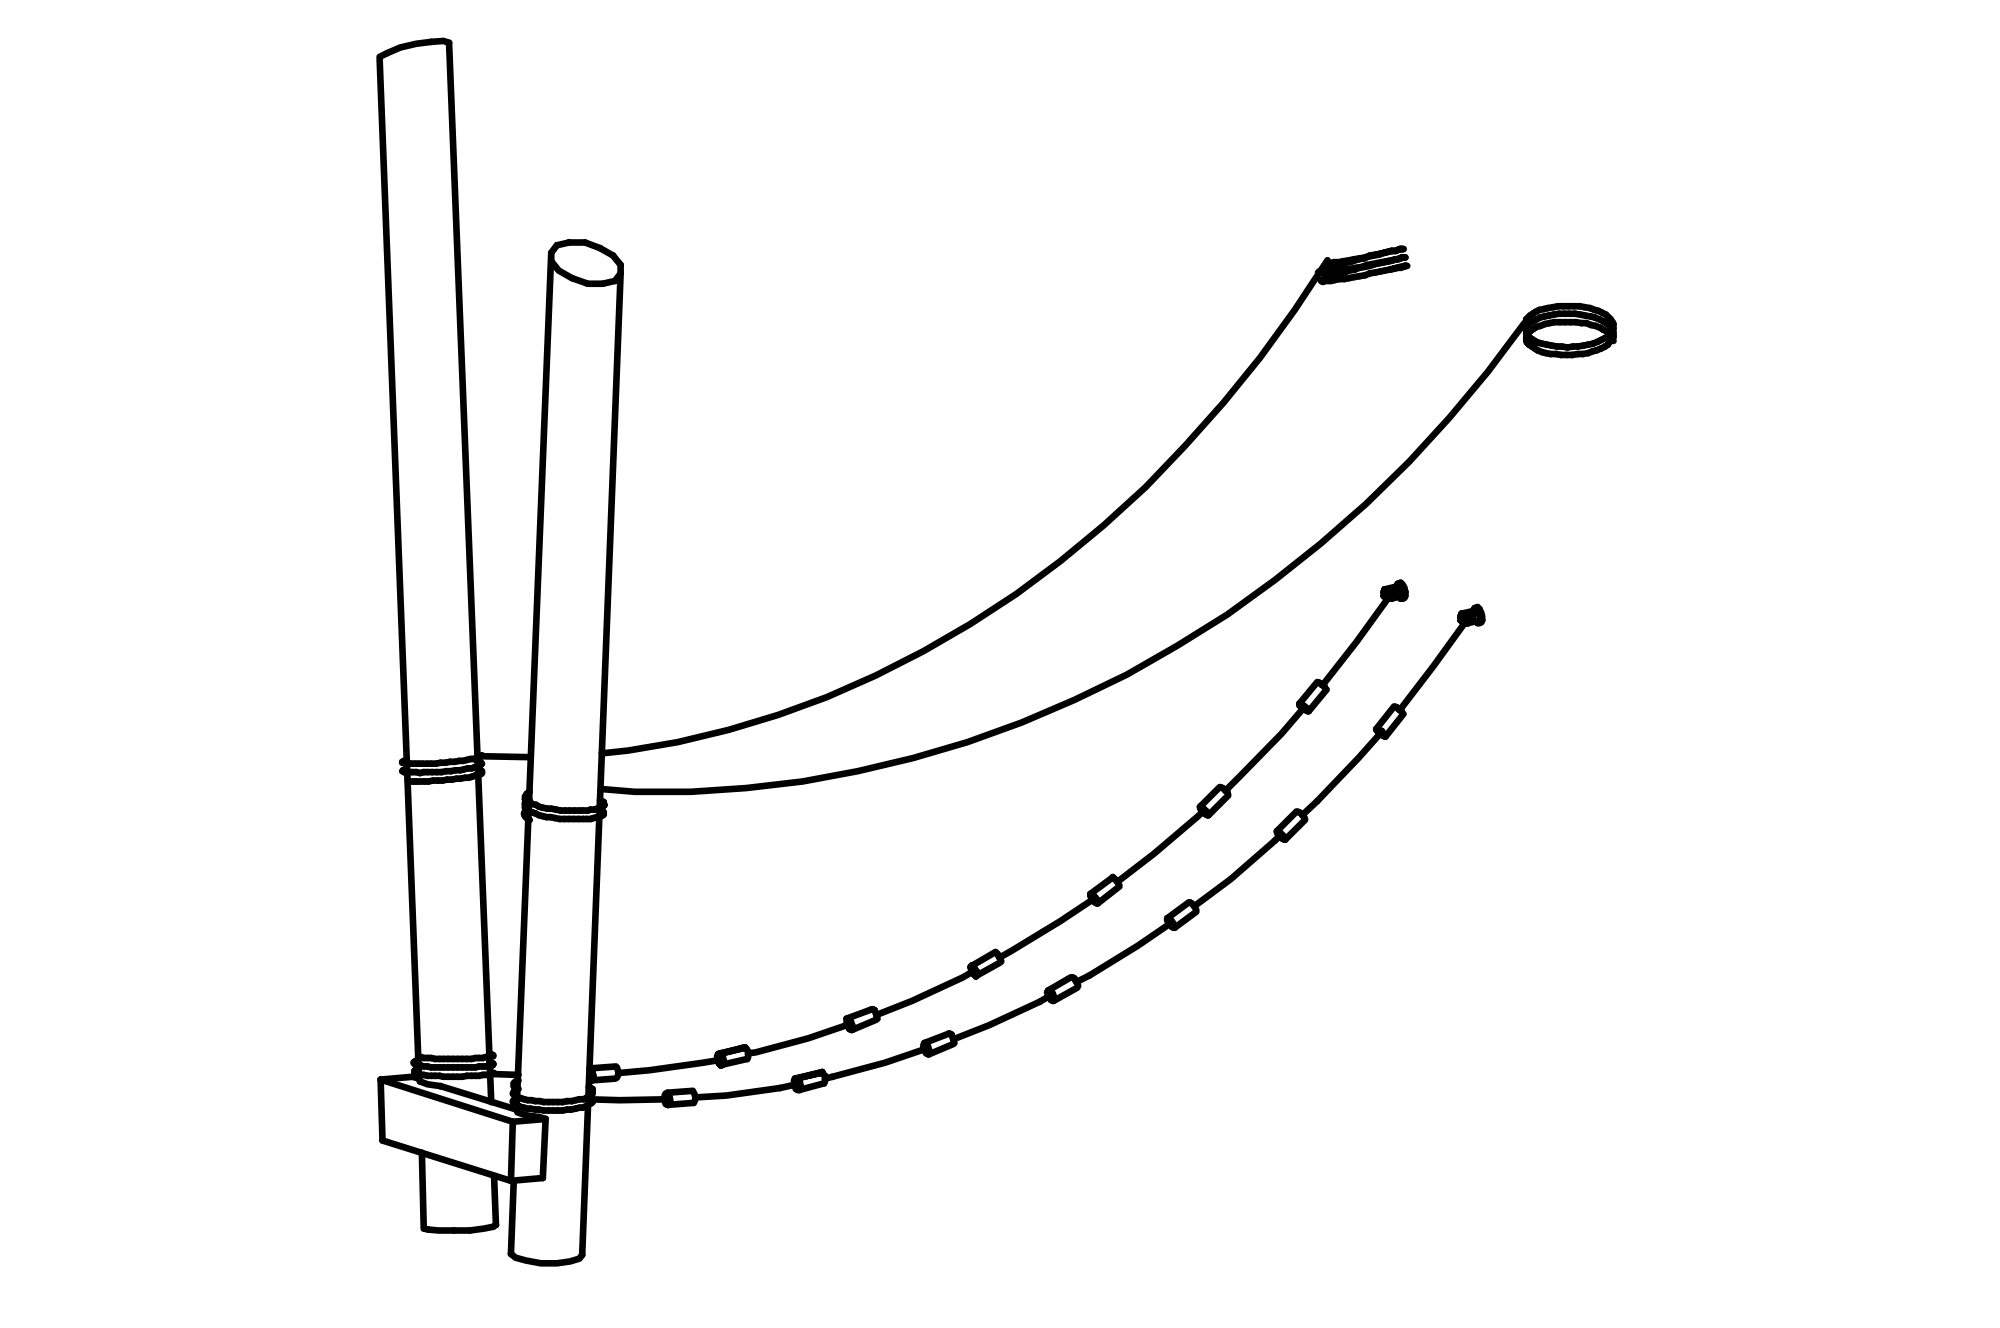 End Frame with ladder and climbing holds